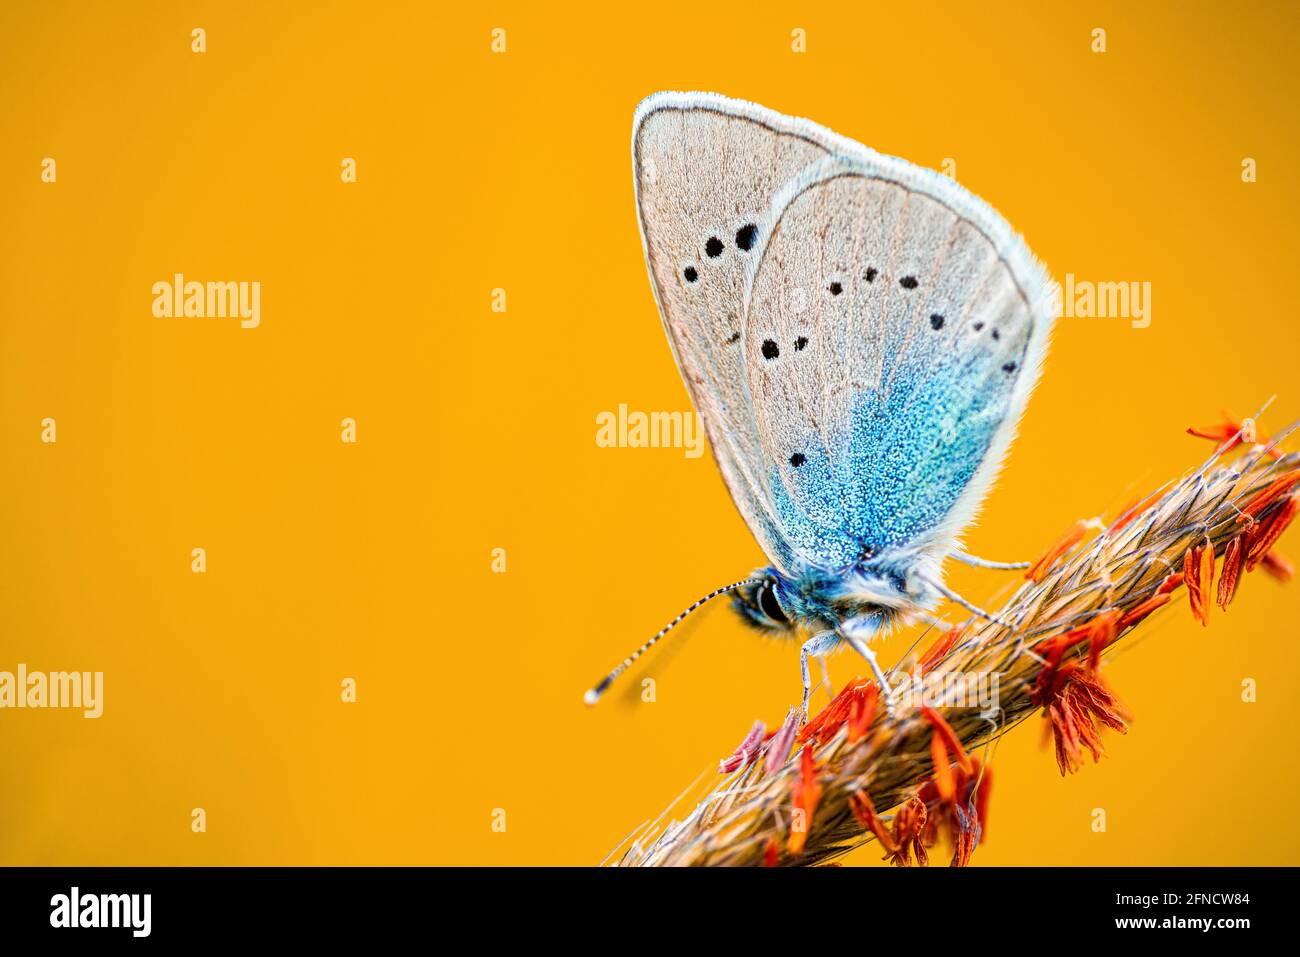 Macro shot of Lesser fiery copper (Lycaena thersamon) butterfly perched on strand of grass. Isolated on orange background. Shallow depth of field Stock Photo